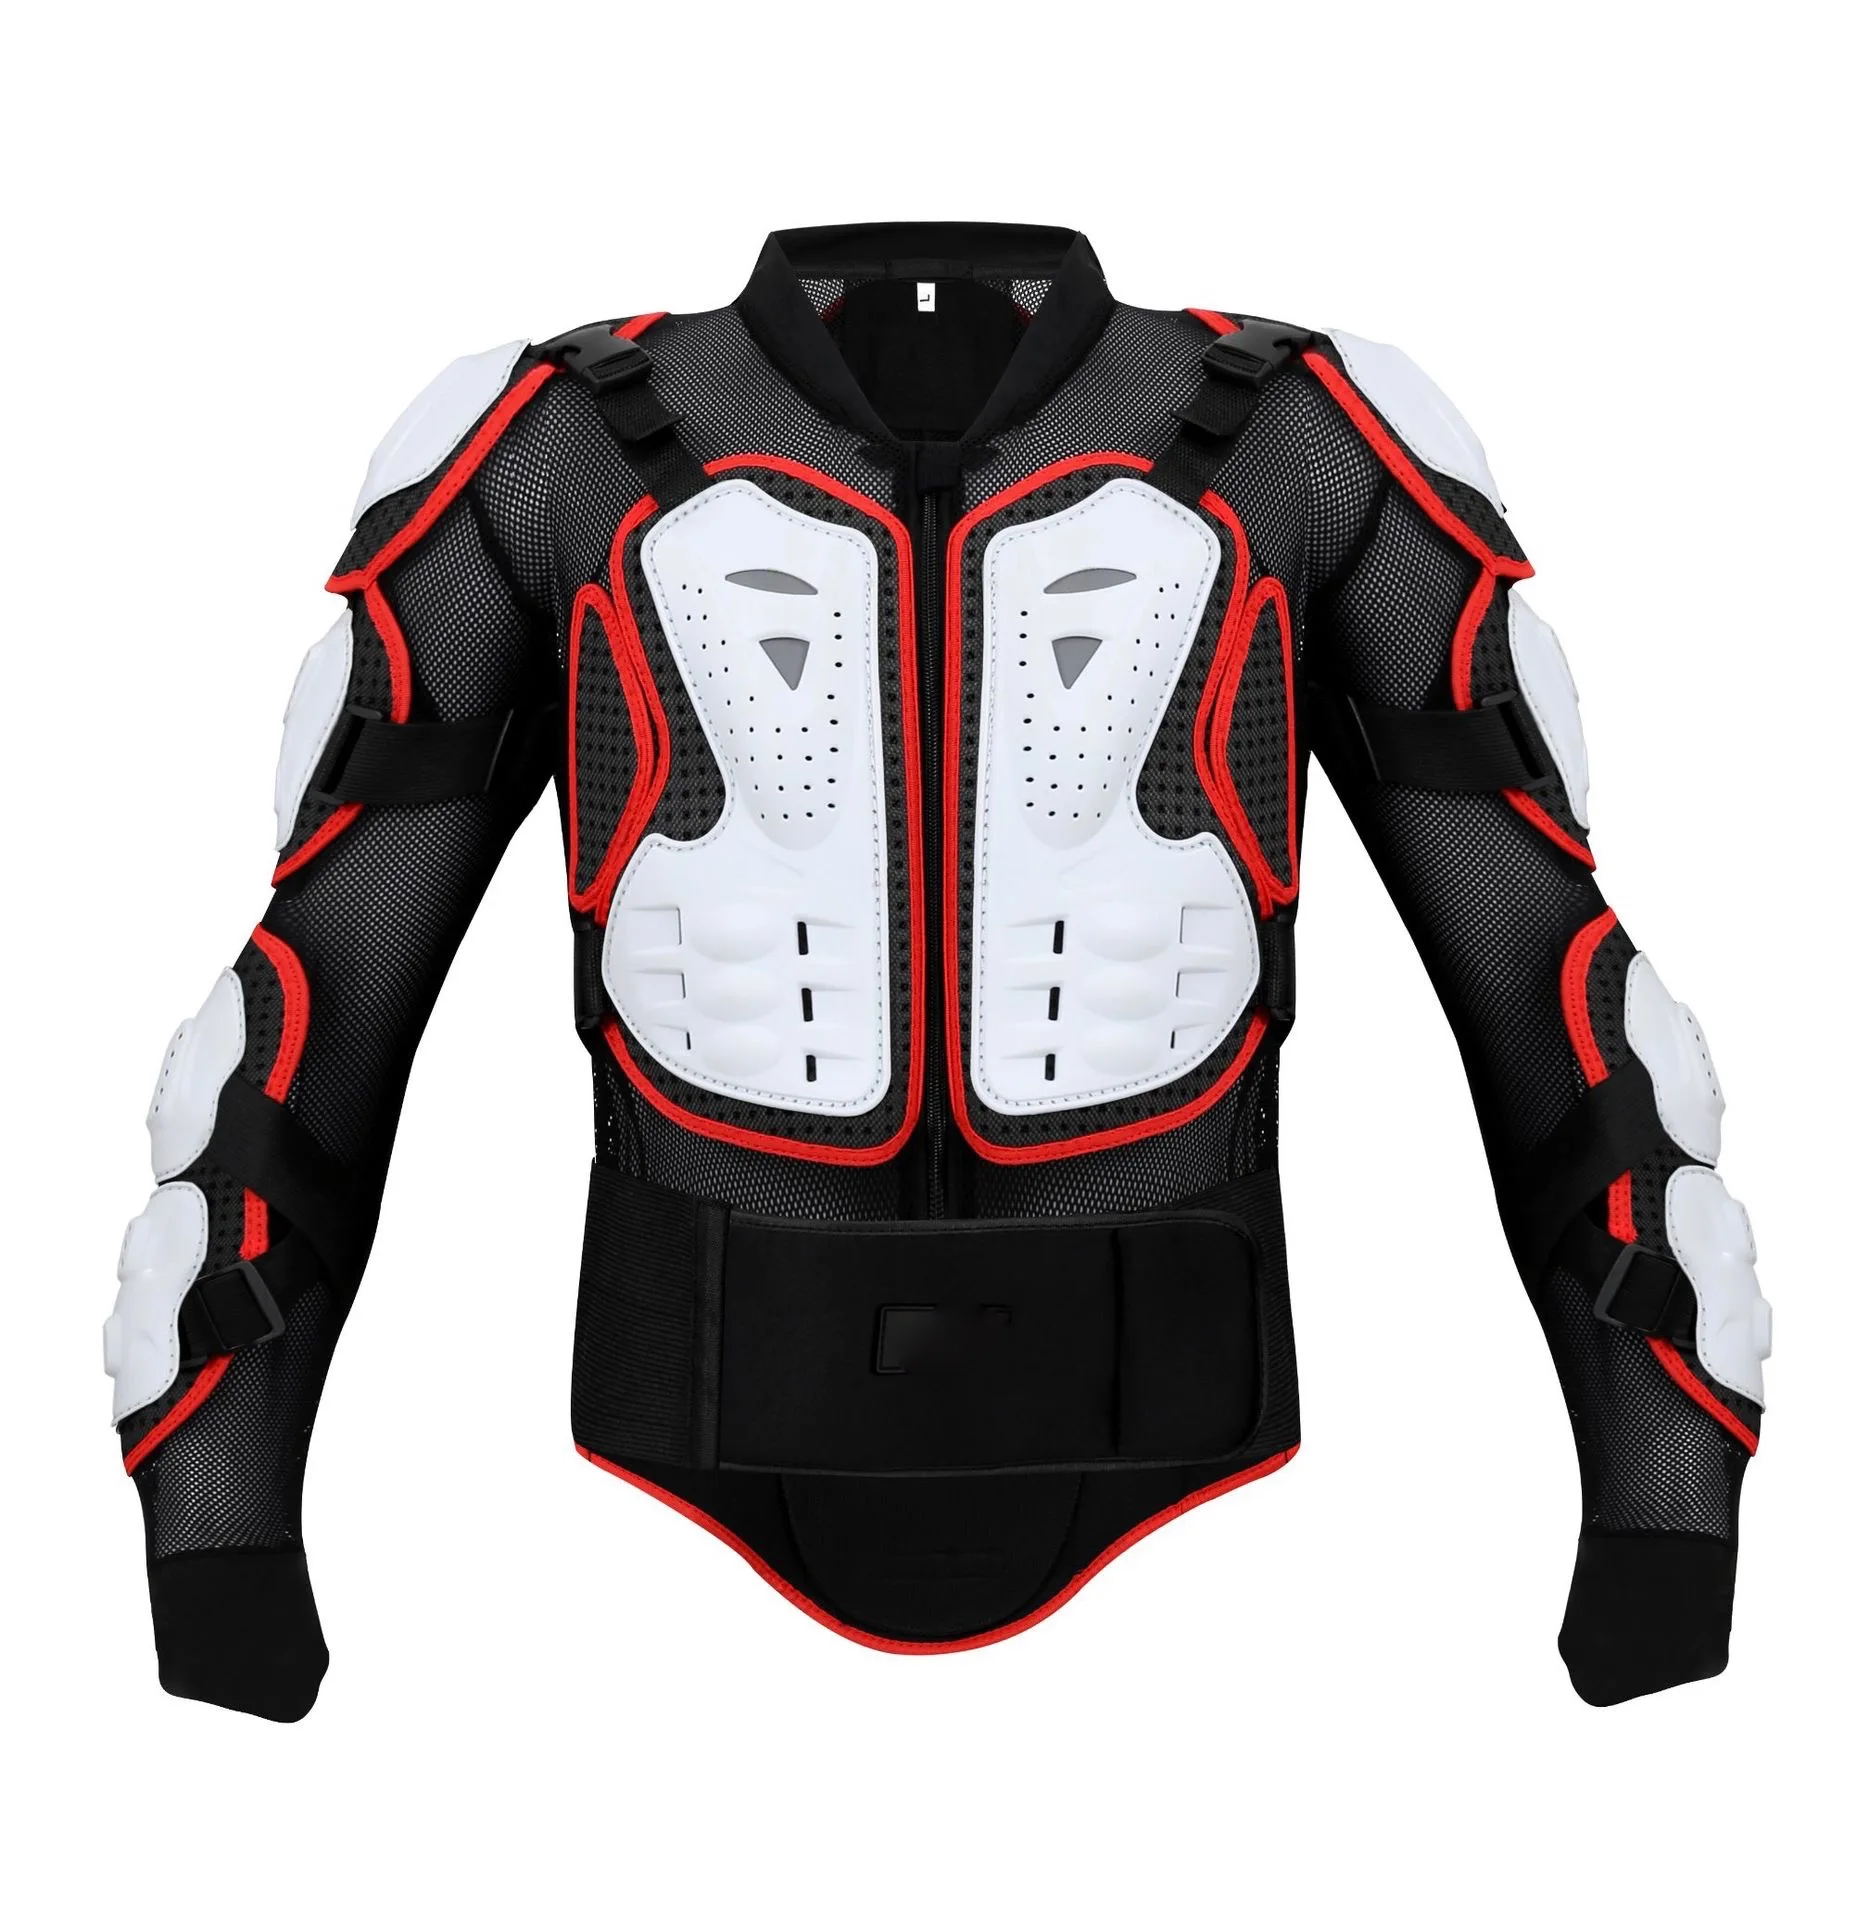 Motorcycle Motocross Cycle Motorbike Body Armour Suit Jacket Spine Protector 